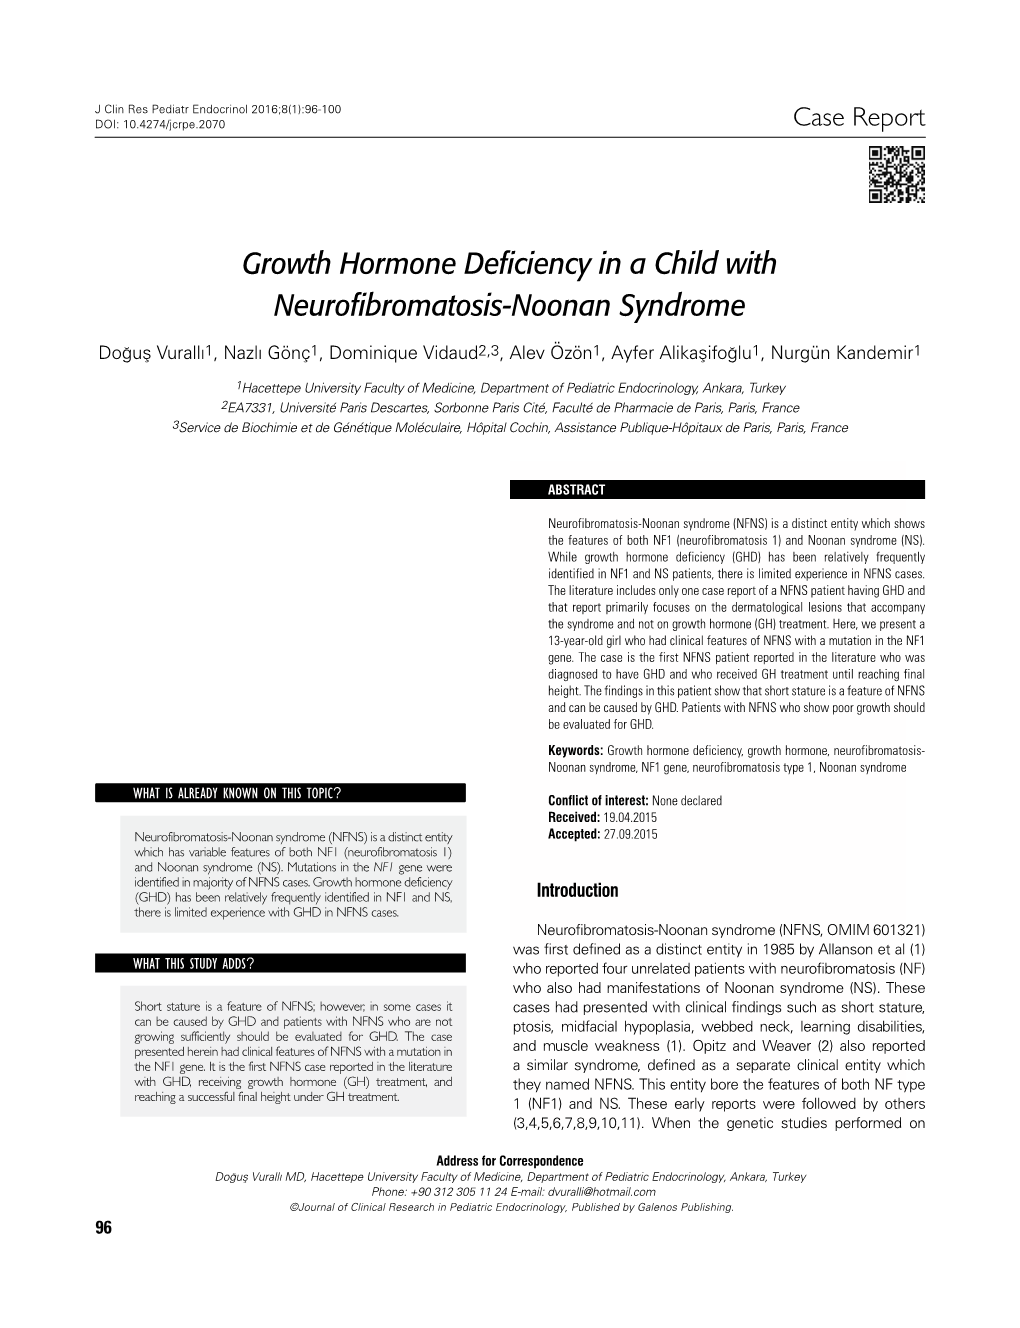 Growth Hormone Deficiency in a Child with Neurofibromatosis-Noonan Syndrome